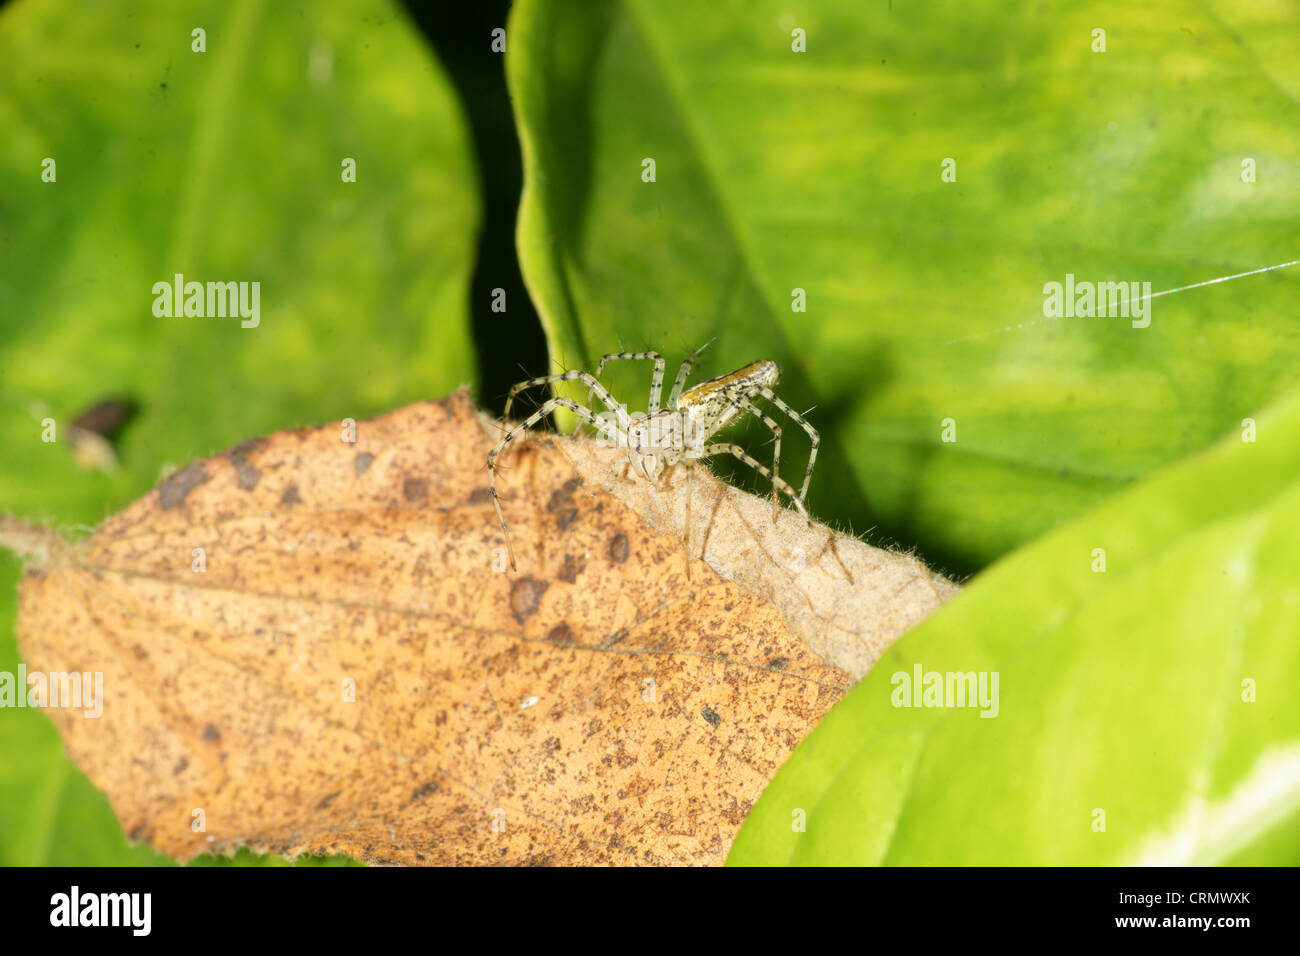 Striped Lynx spider (Oxyopes salticus) waits for prey relying on camouflage and being still. Stock Photo